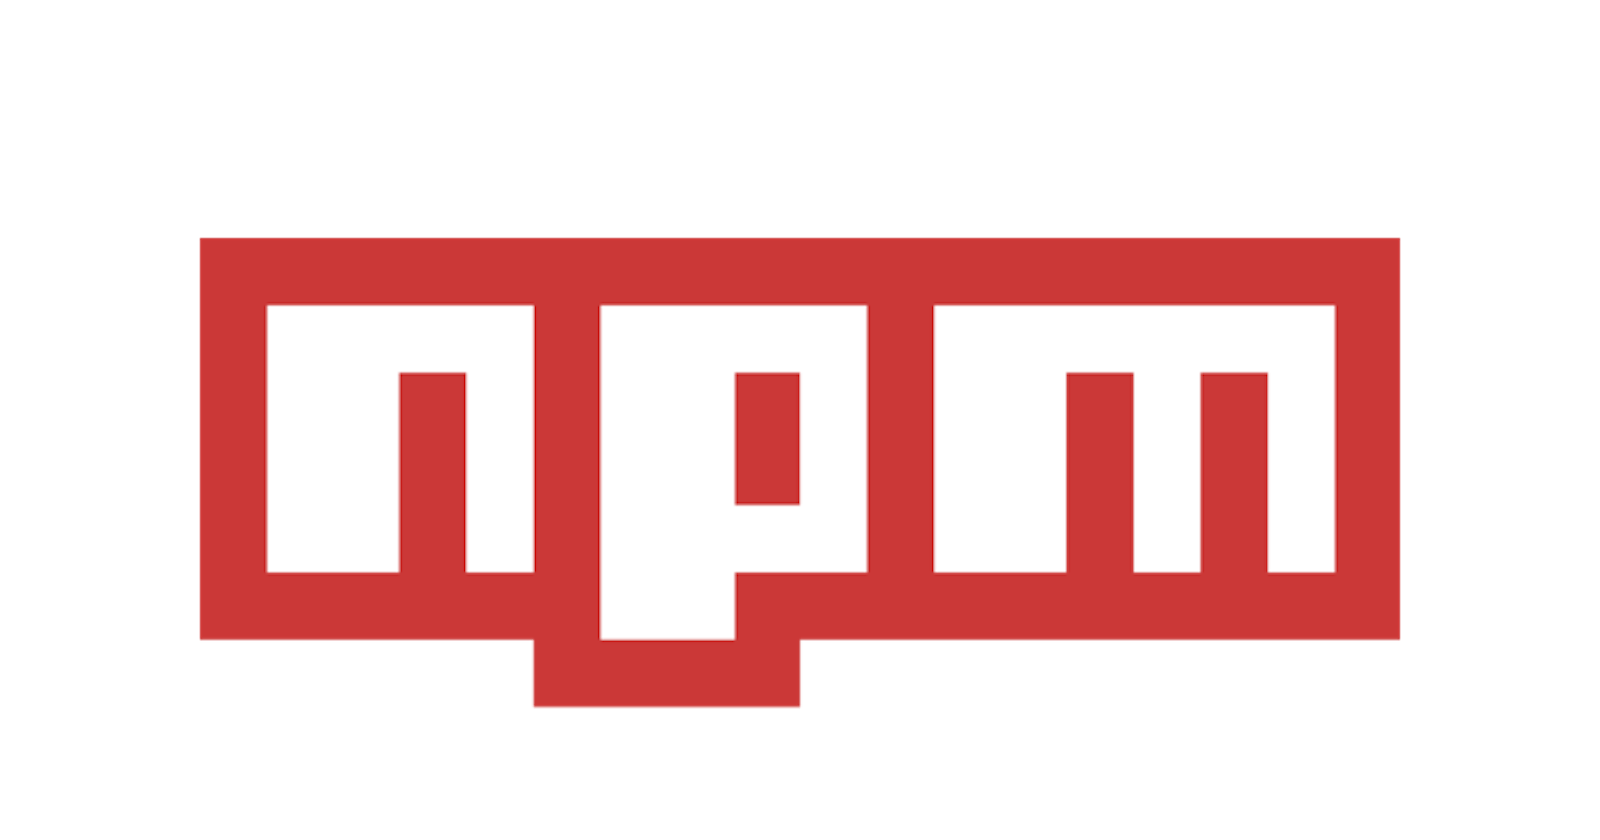 How I built my first NPM package.